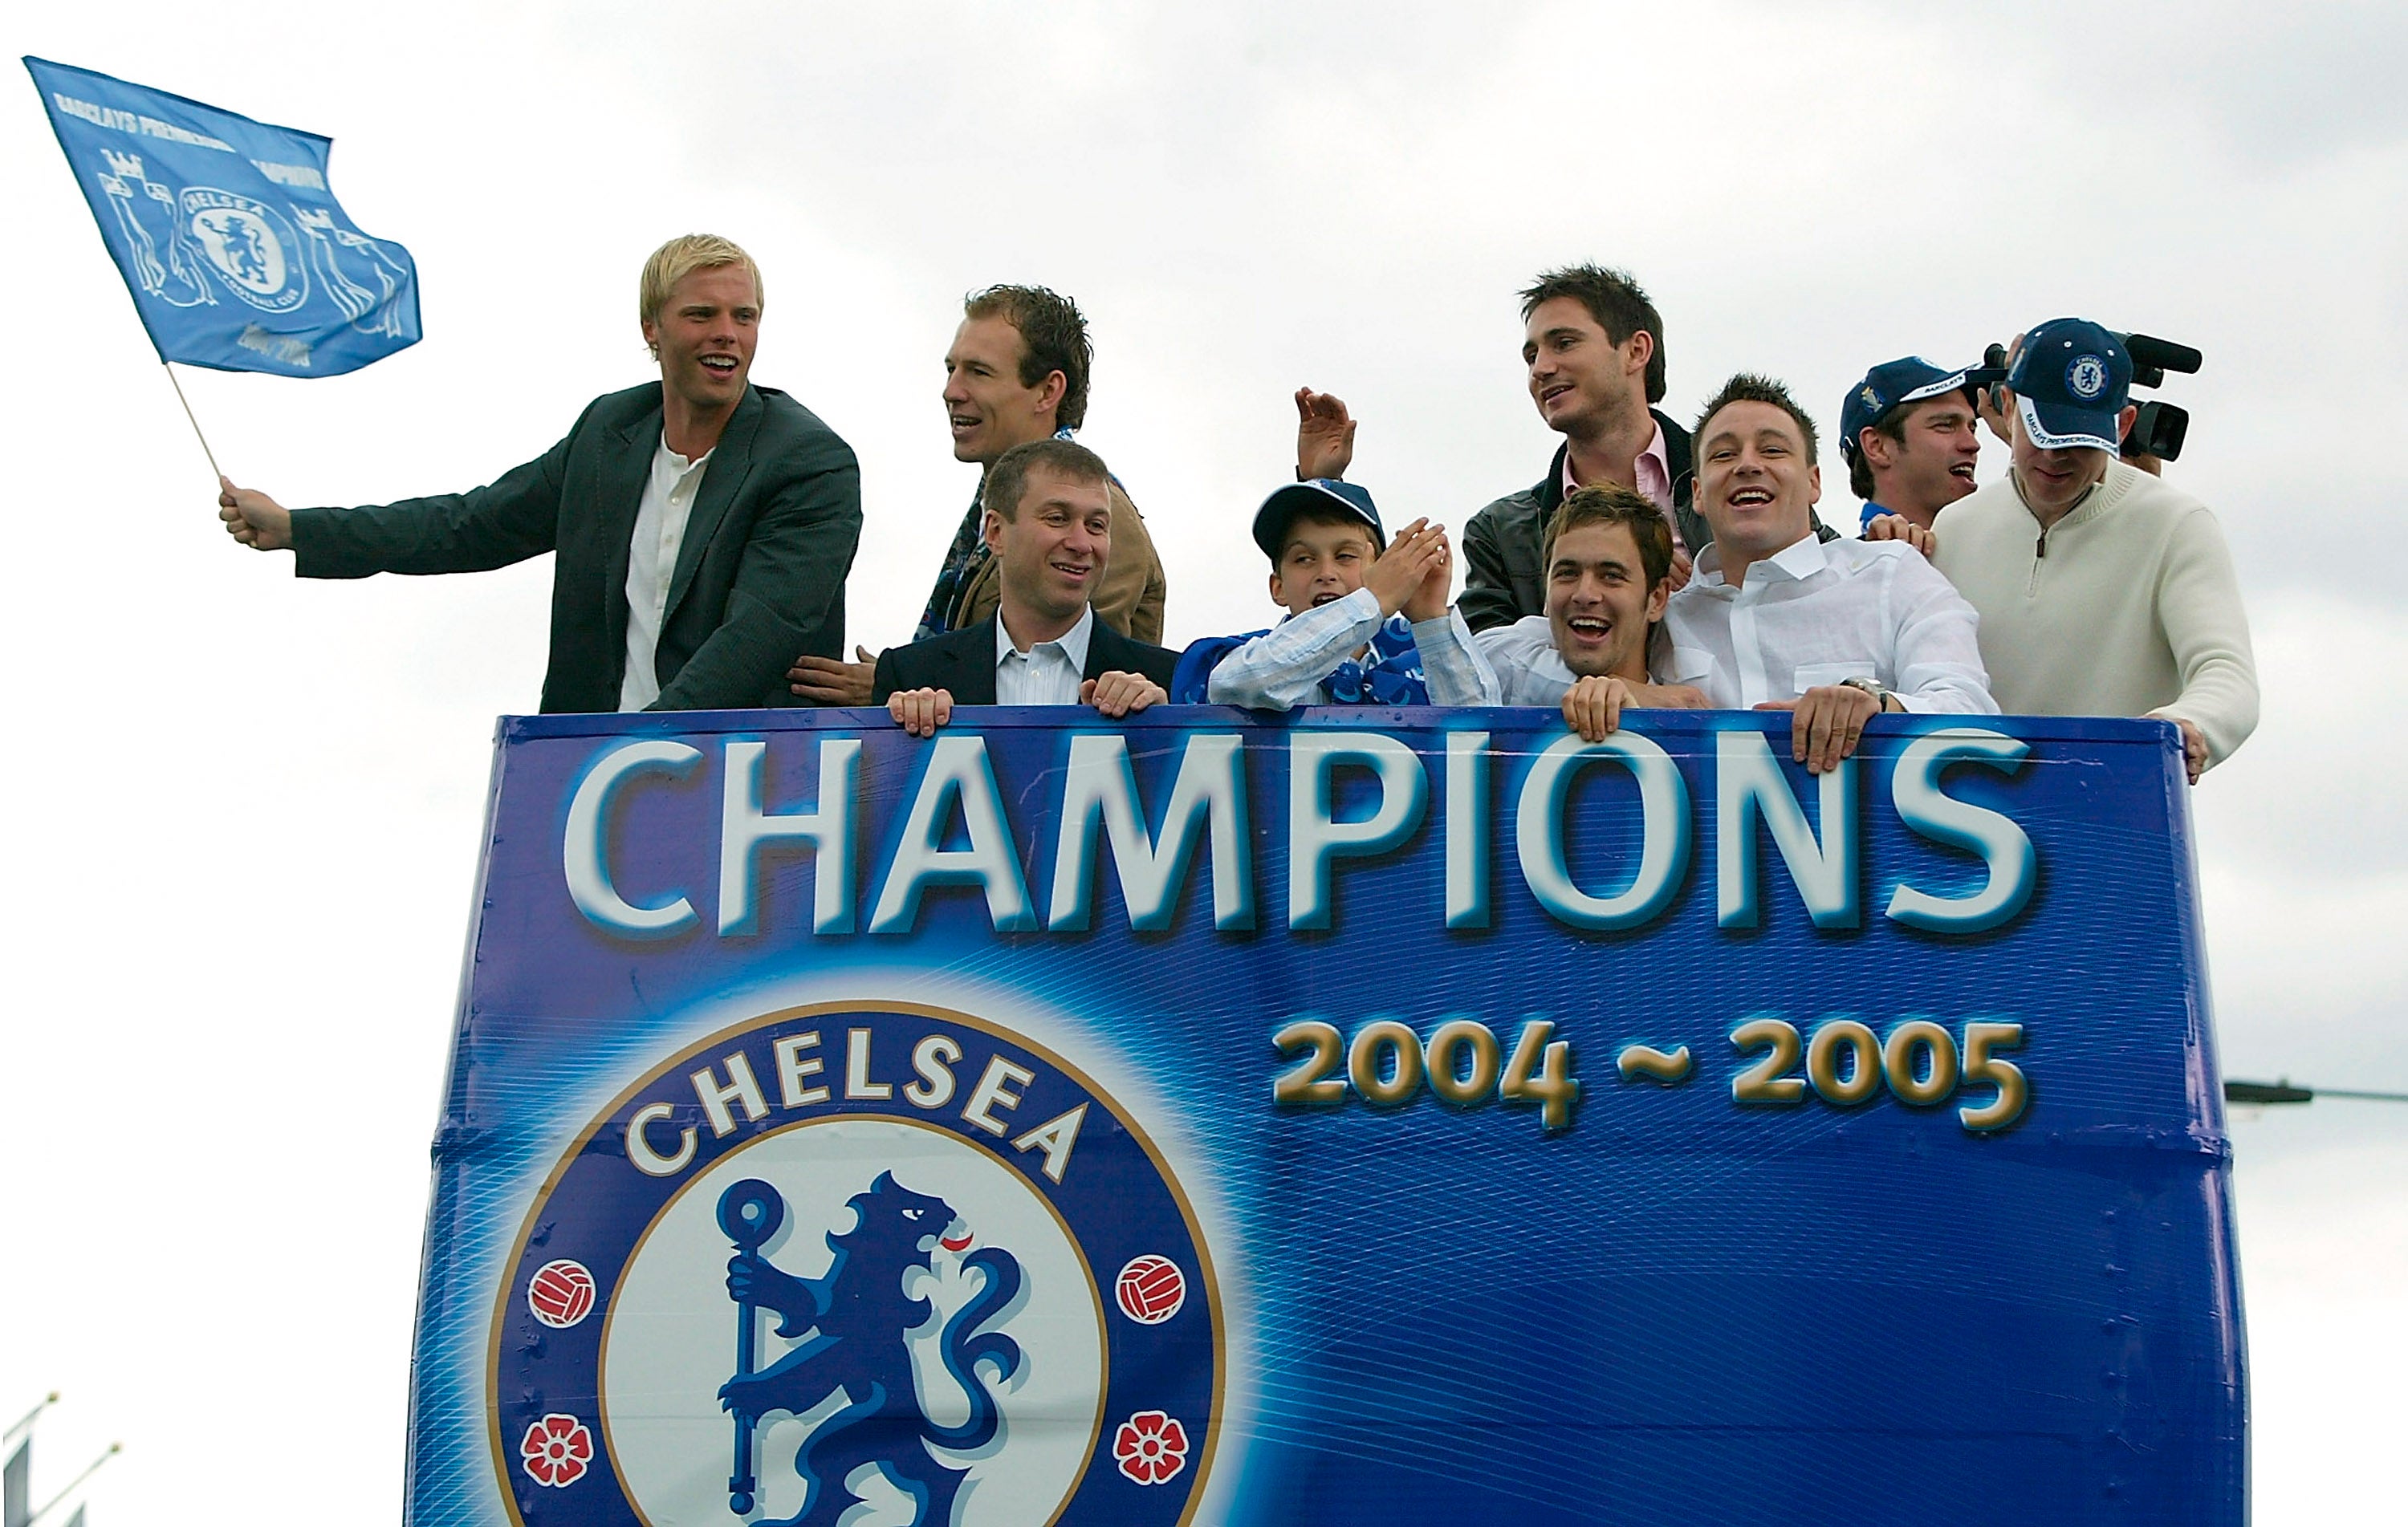 When Roman Abramovich bought Chelsea it changed the football landscape